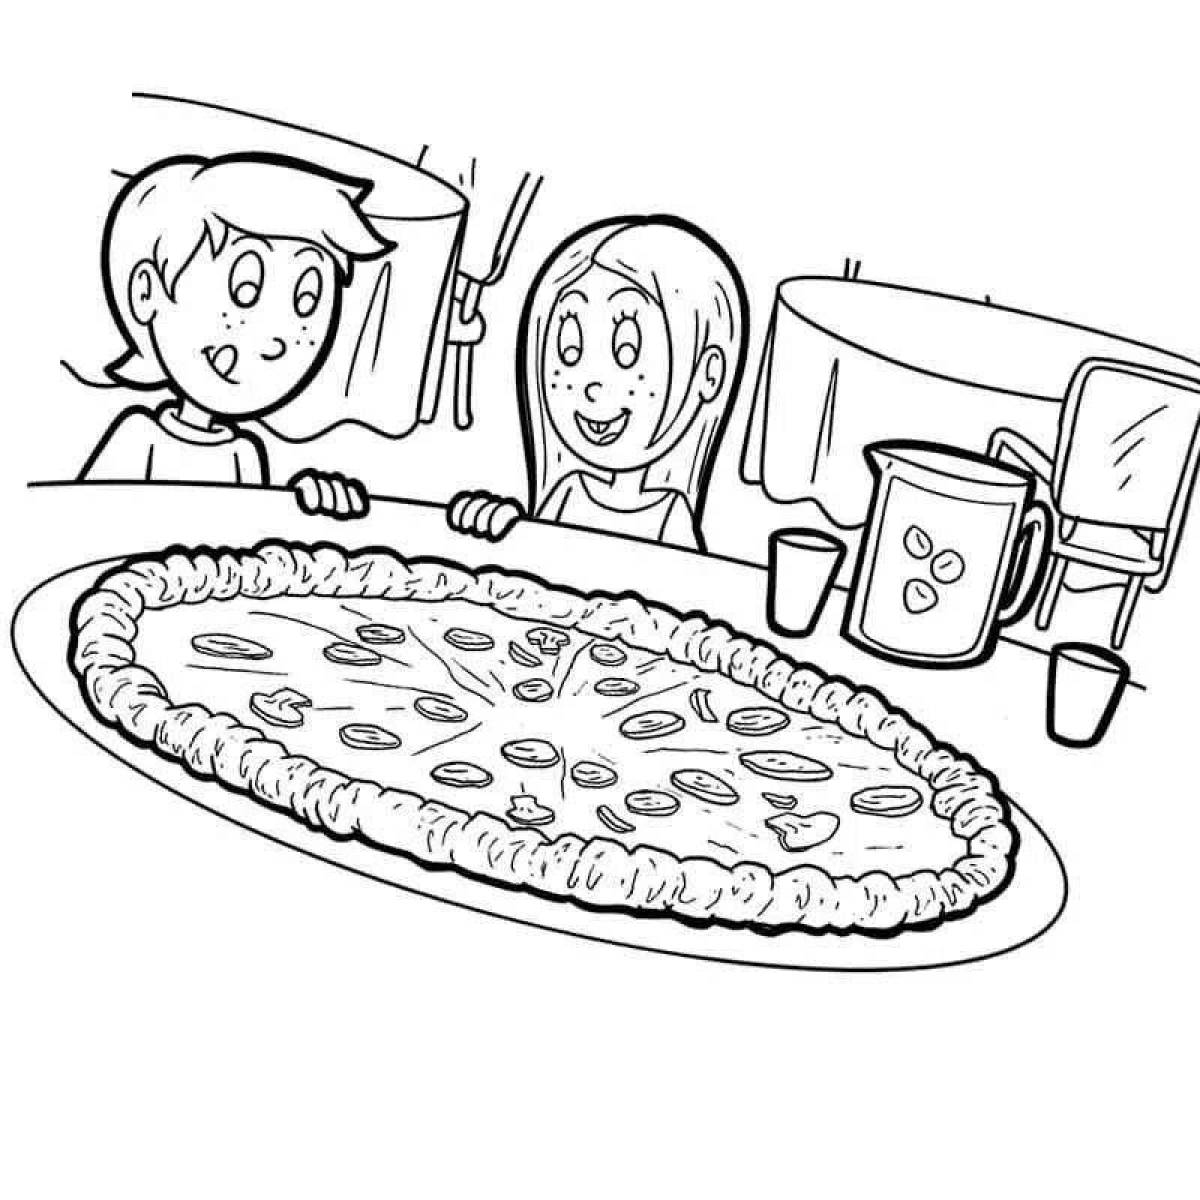 Coloring page charming pizzeria